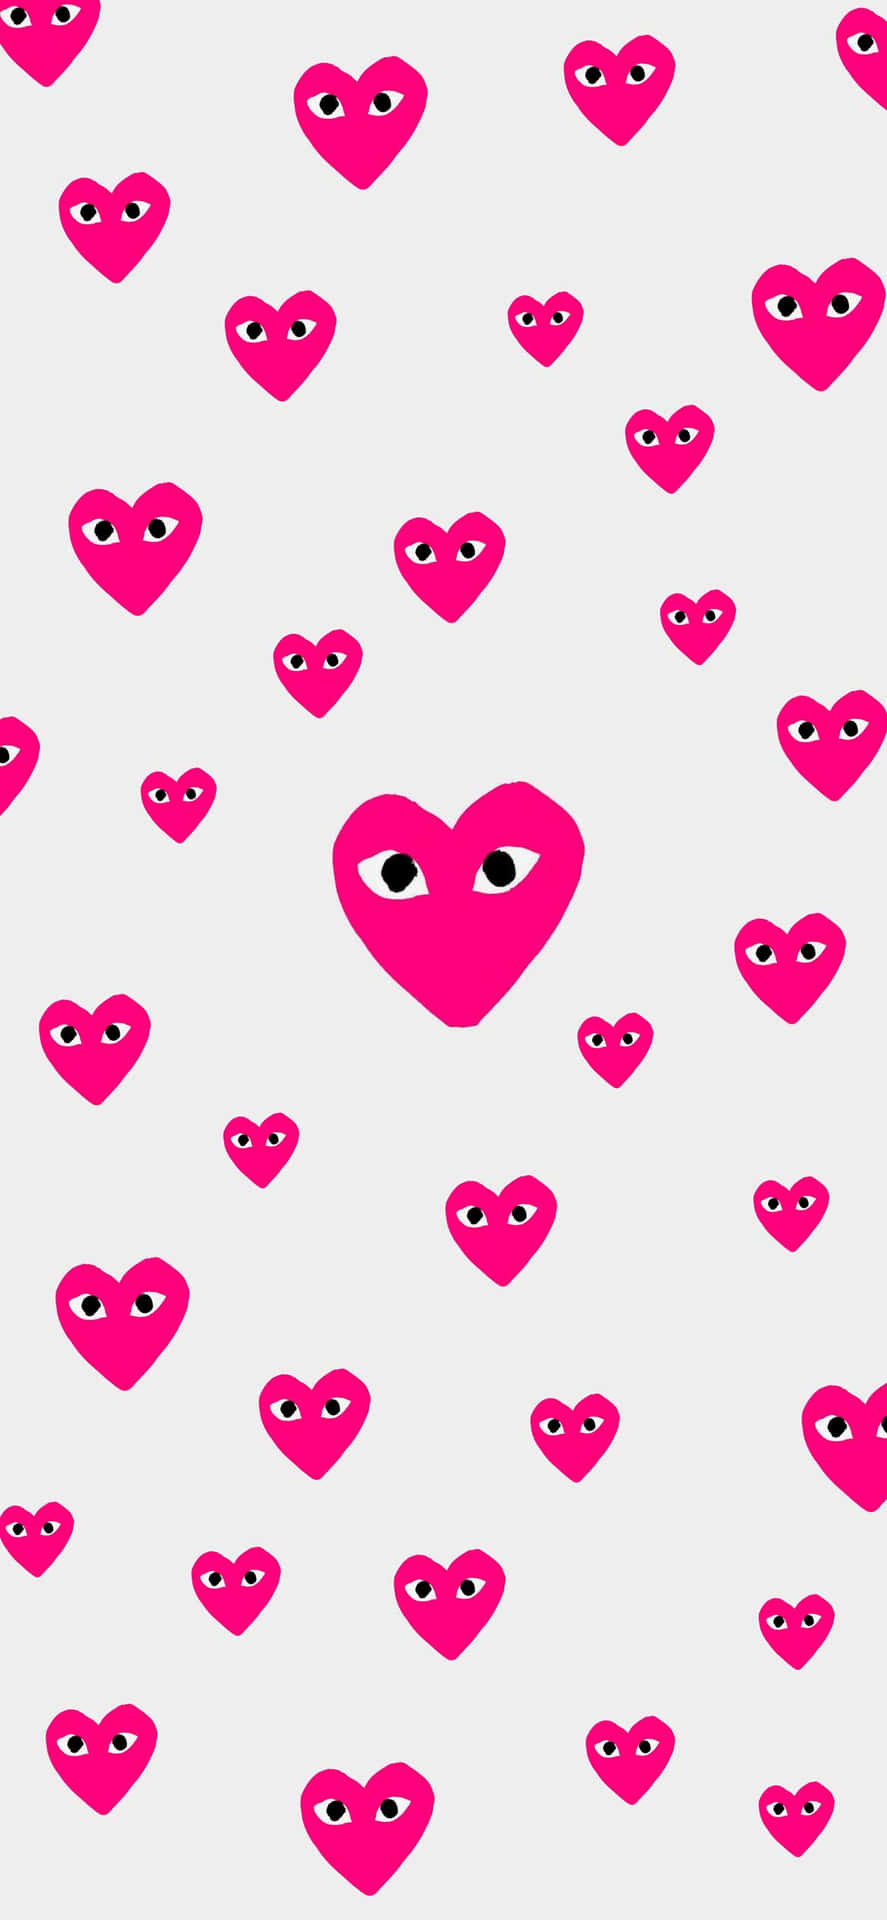 Comme Des Garcons Play Wallpapers